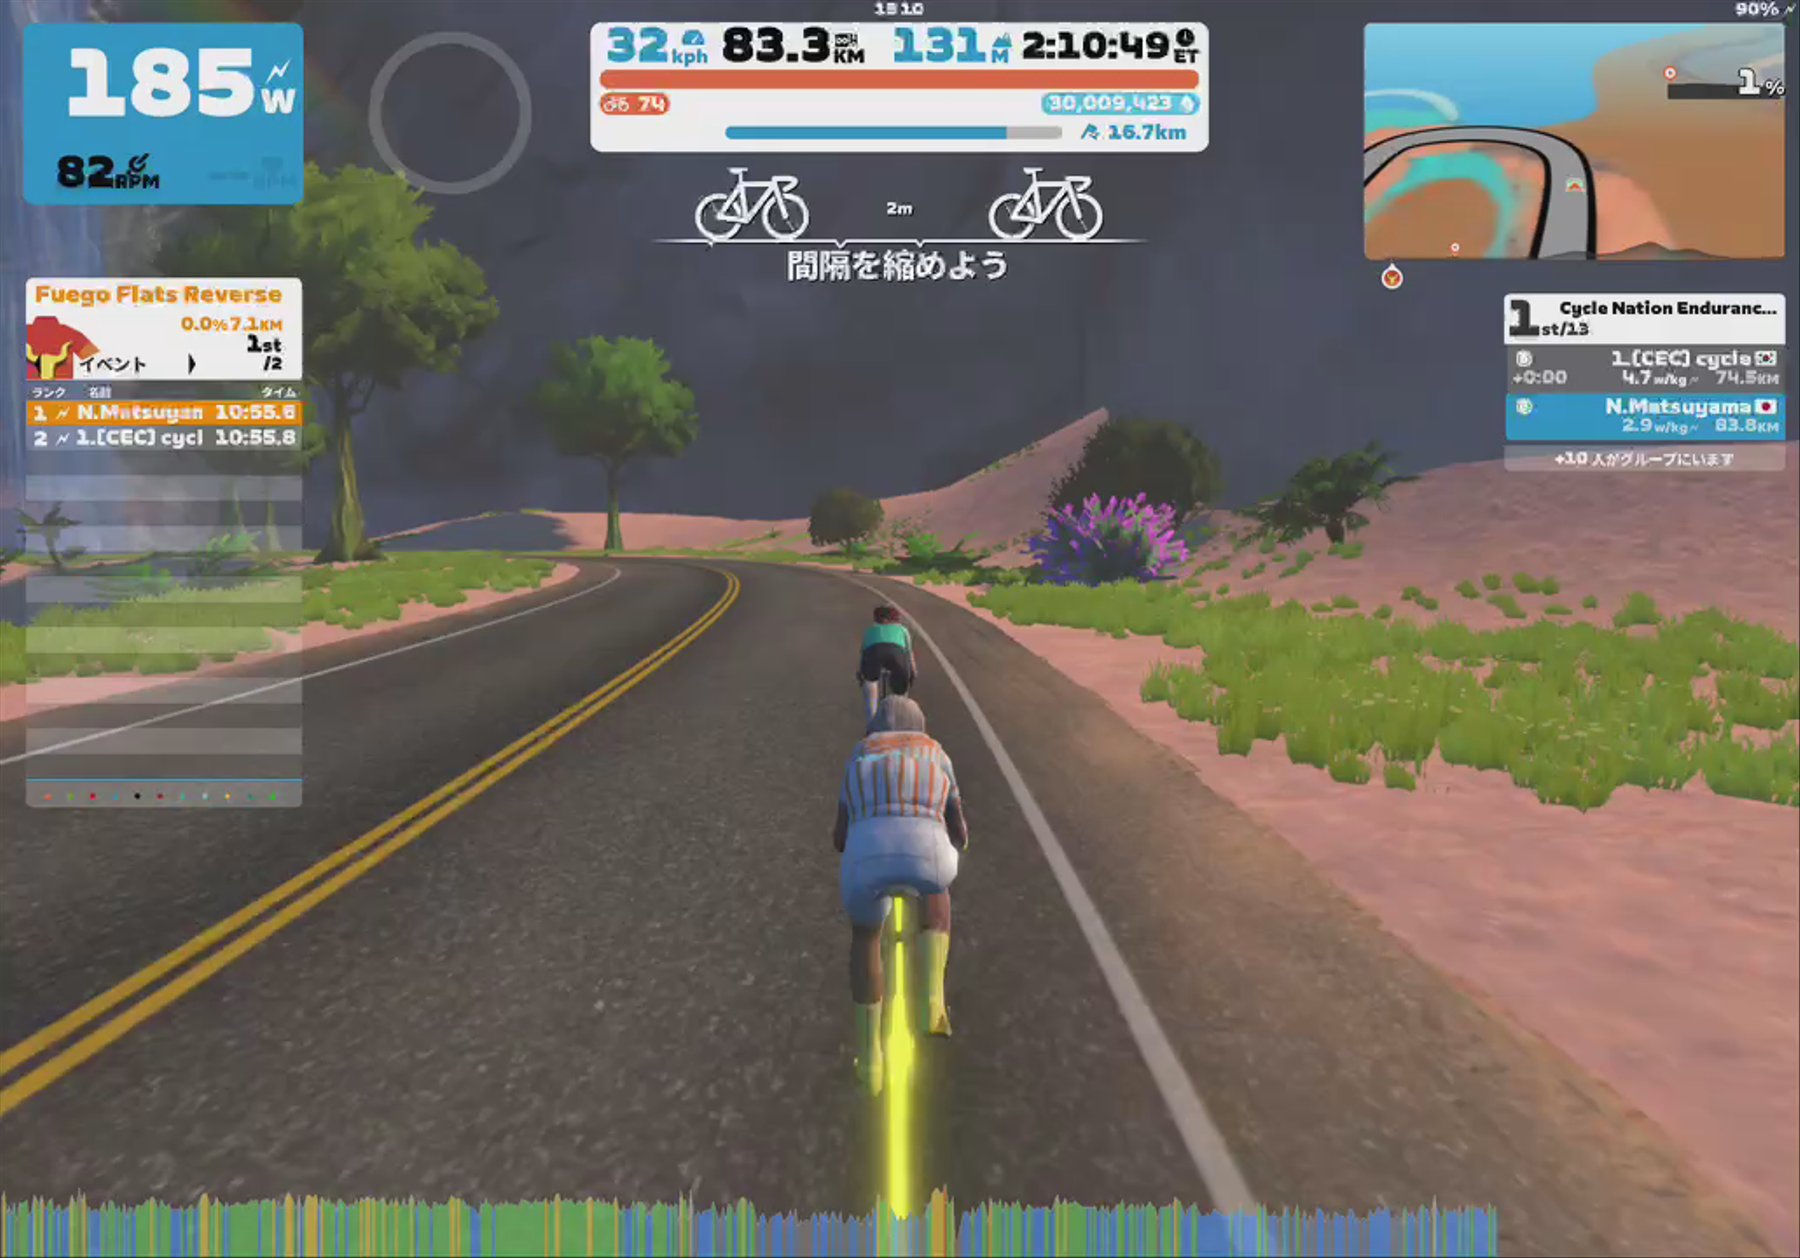 Zwift - Group Ride: Cycle Nation Endurance Ride (B) on Tempus Fugit in Watopia